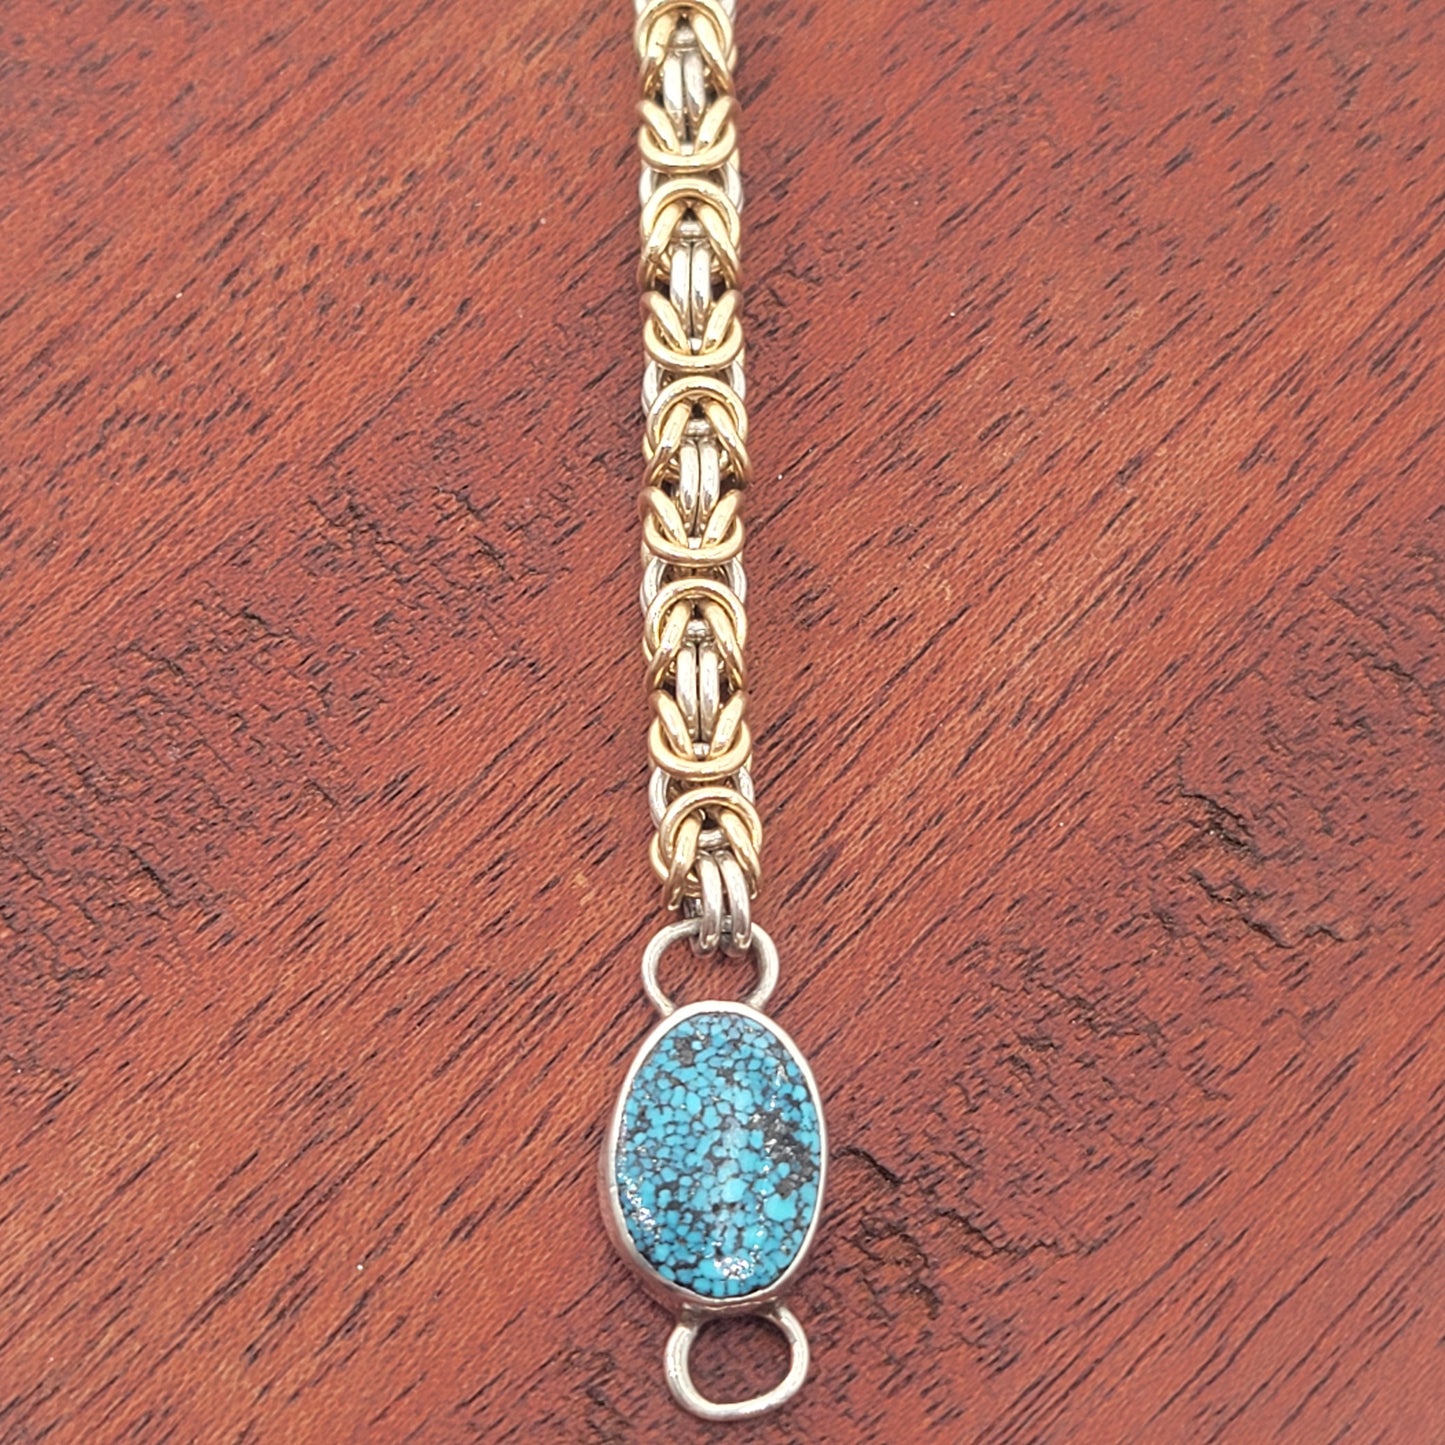 Small Silver and Gold Chain Bracelet with Turquoise